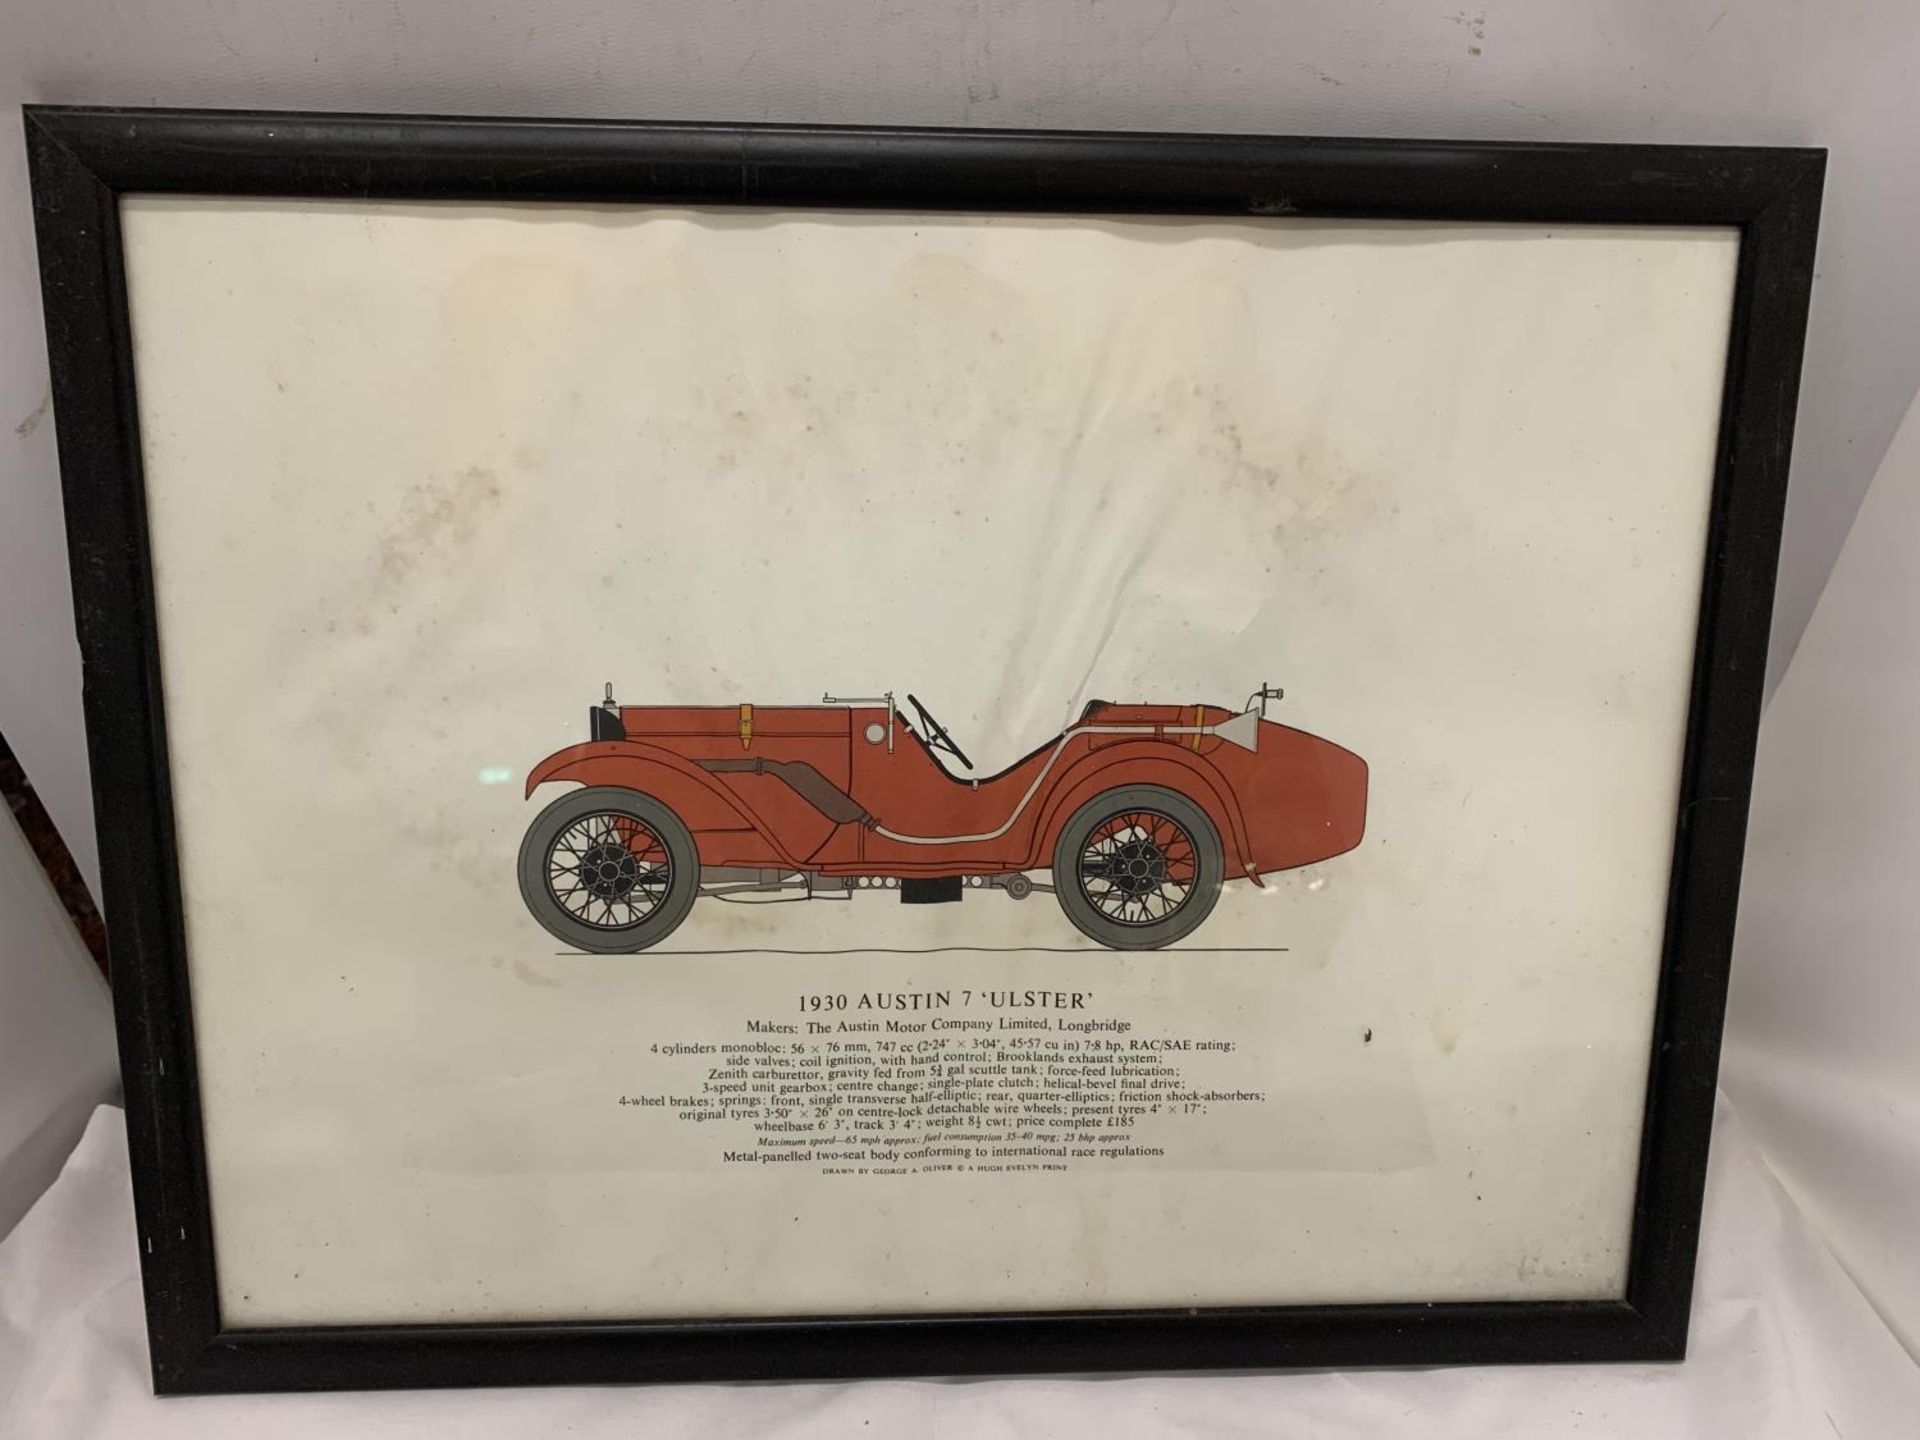 SIX FRAMED PRINTS OF VINTAGE CARS TO INCLUDE A 1930 AUSTIN 7 'ULSTER', 1926 SUNBEAM 3 LITRE, ETC - Image 5 of 7